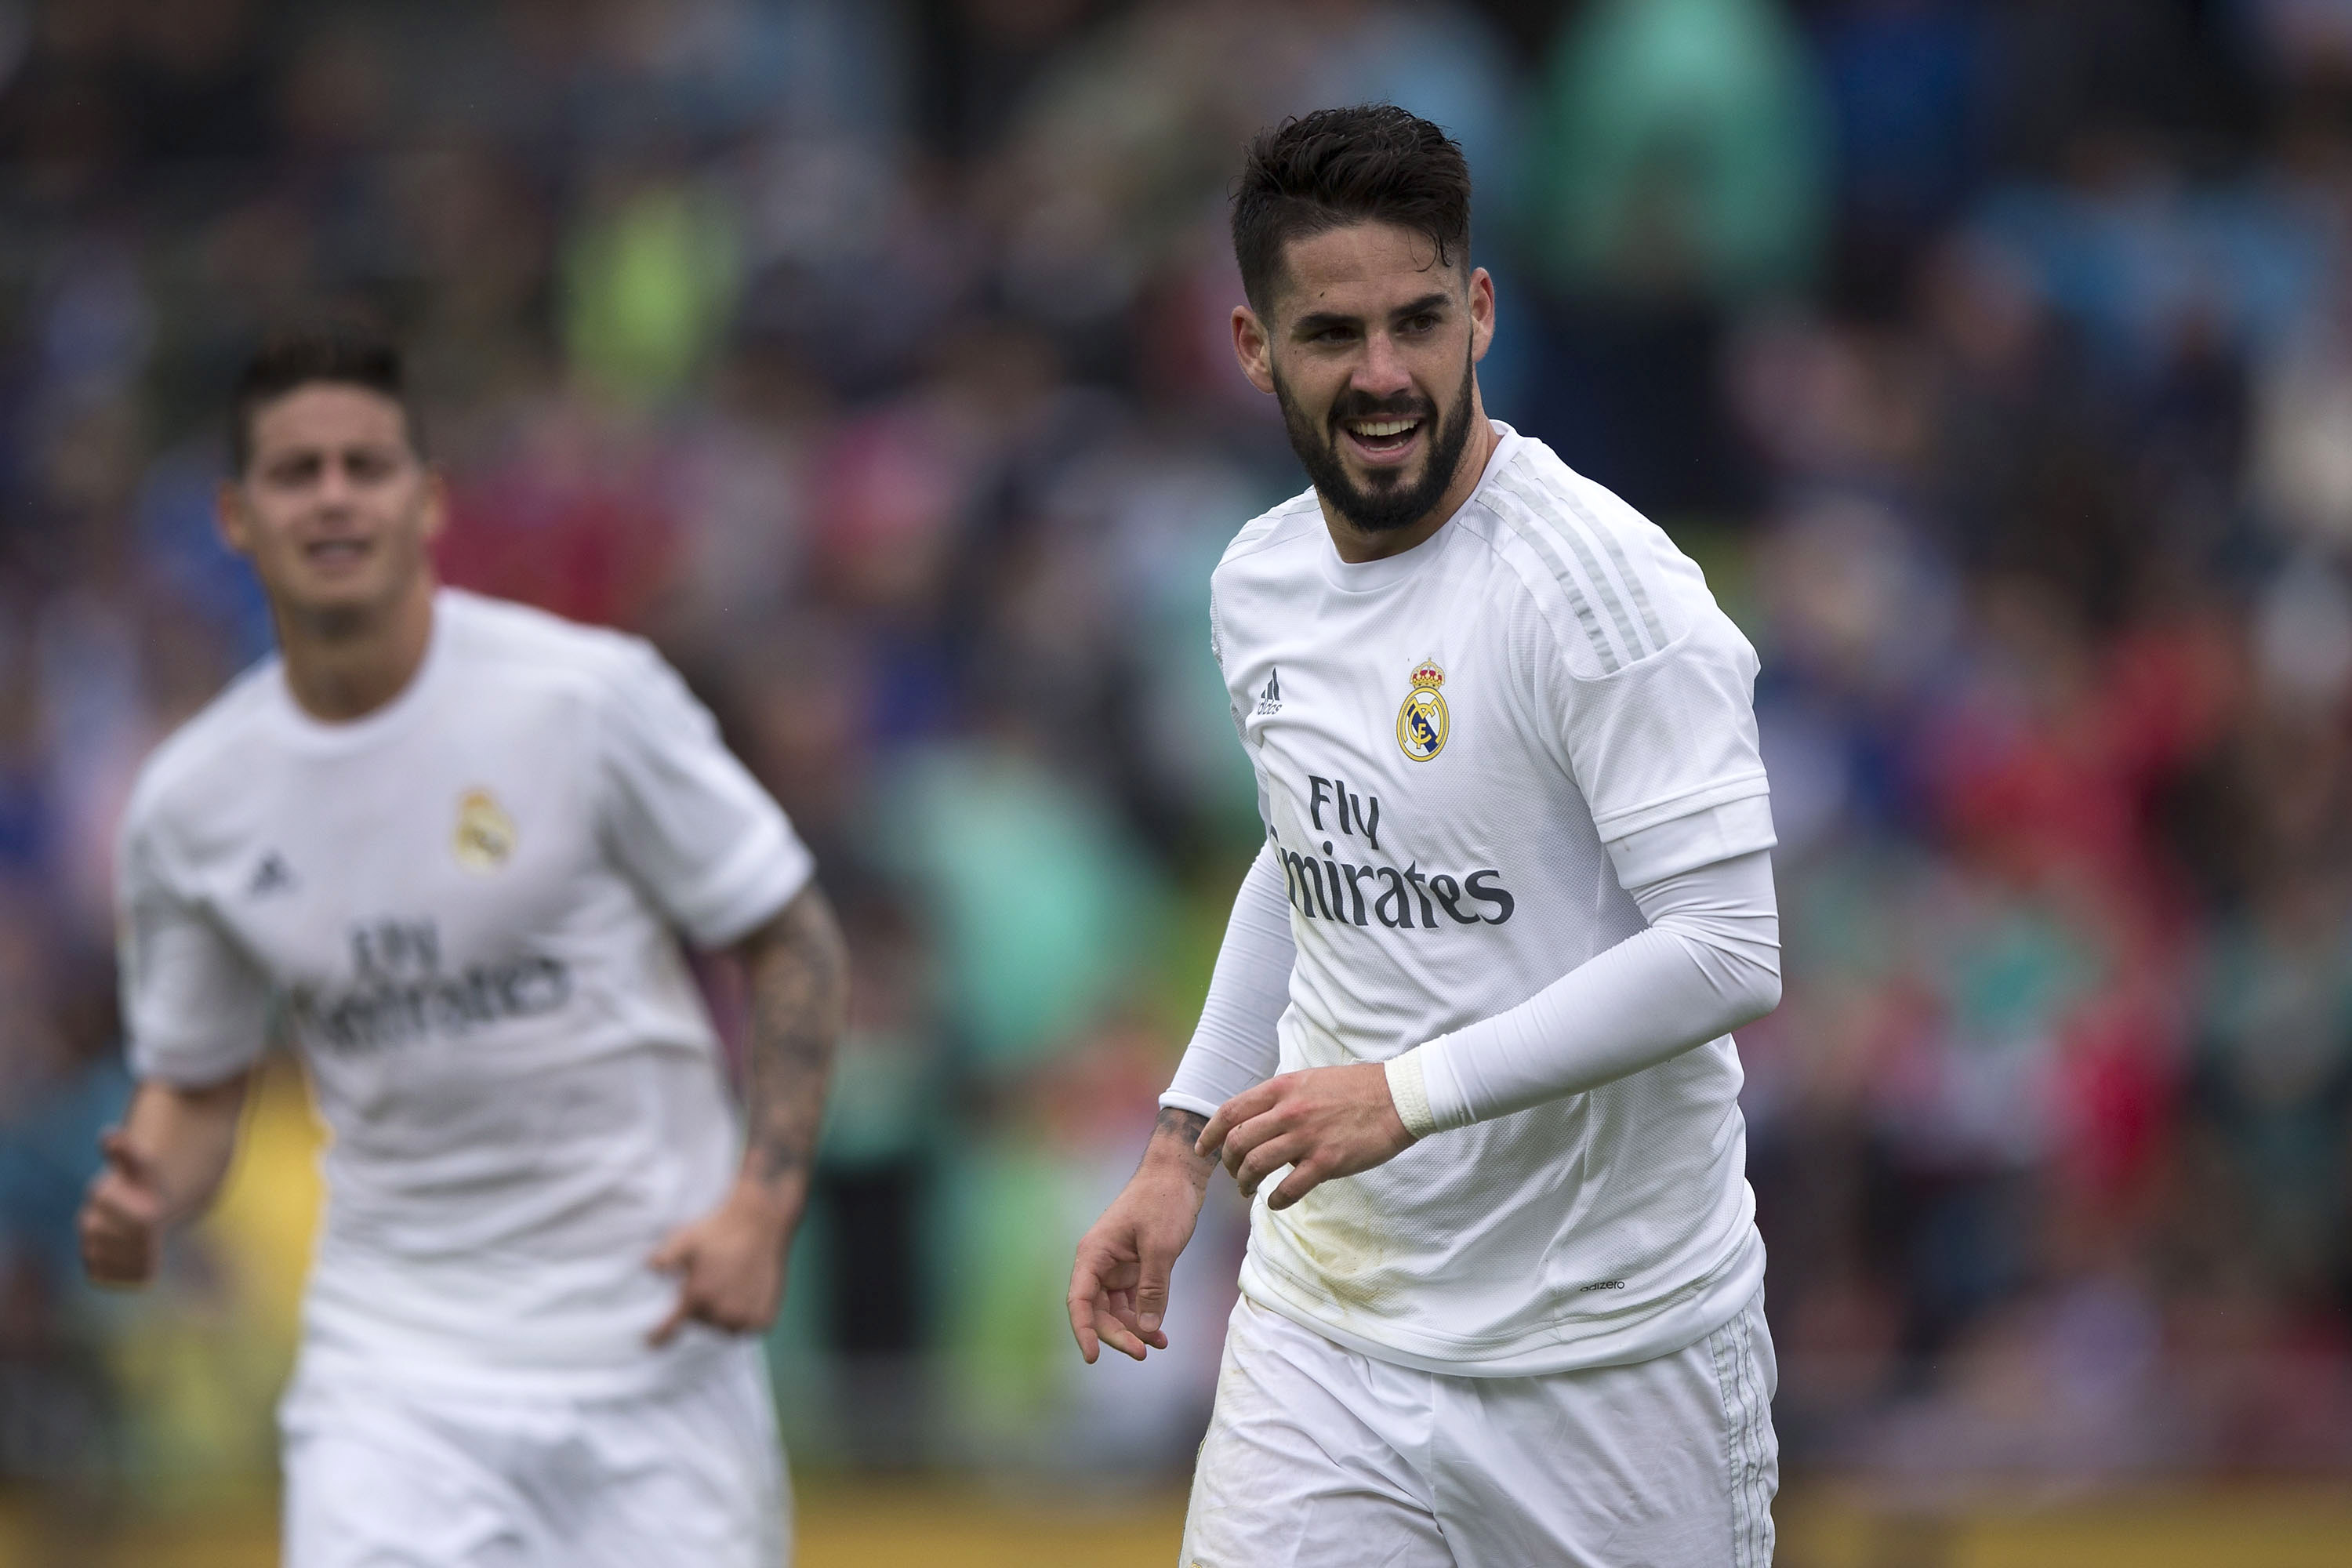 GETAFE, SPAIN - APRIL 16:  Francisco Roman Alarcon alias Isco (R) of Real Madrid CF celebrates scoring their second goal during the La Liga match between Getafe CF and Real Madrid CF at Coliseum Alfonso Perez on April 16, 2016 in Getafe, Spain.  (Photo by Gonzalo Arroyo Moreno/Getty Images)